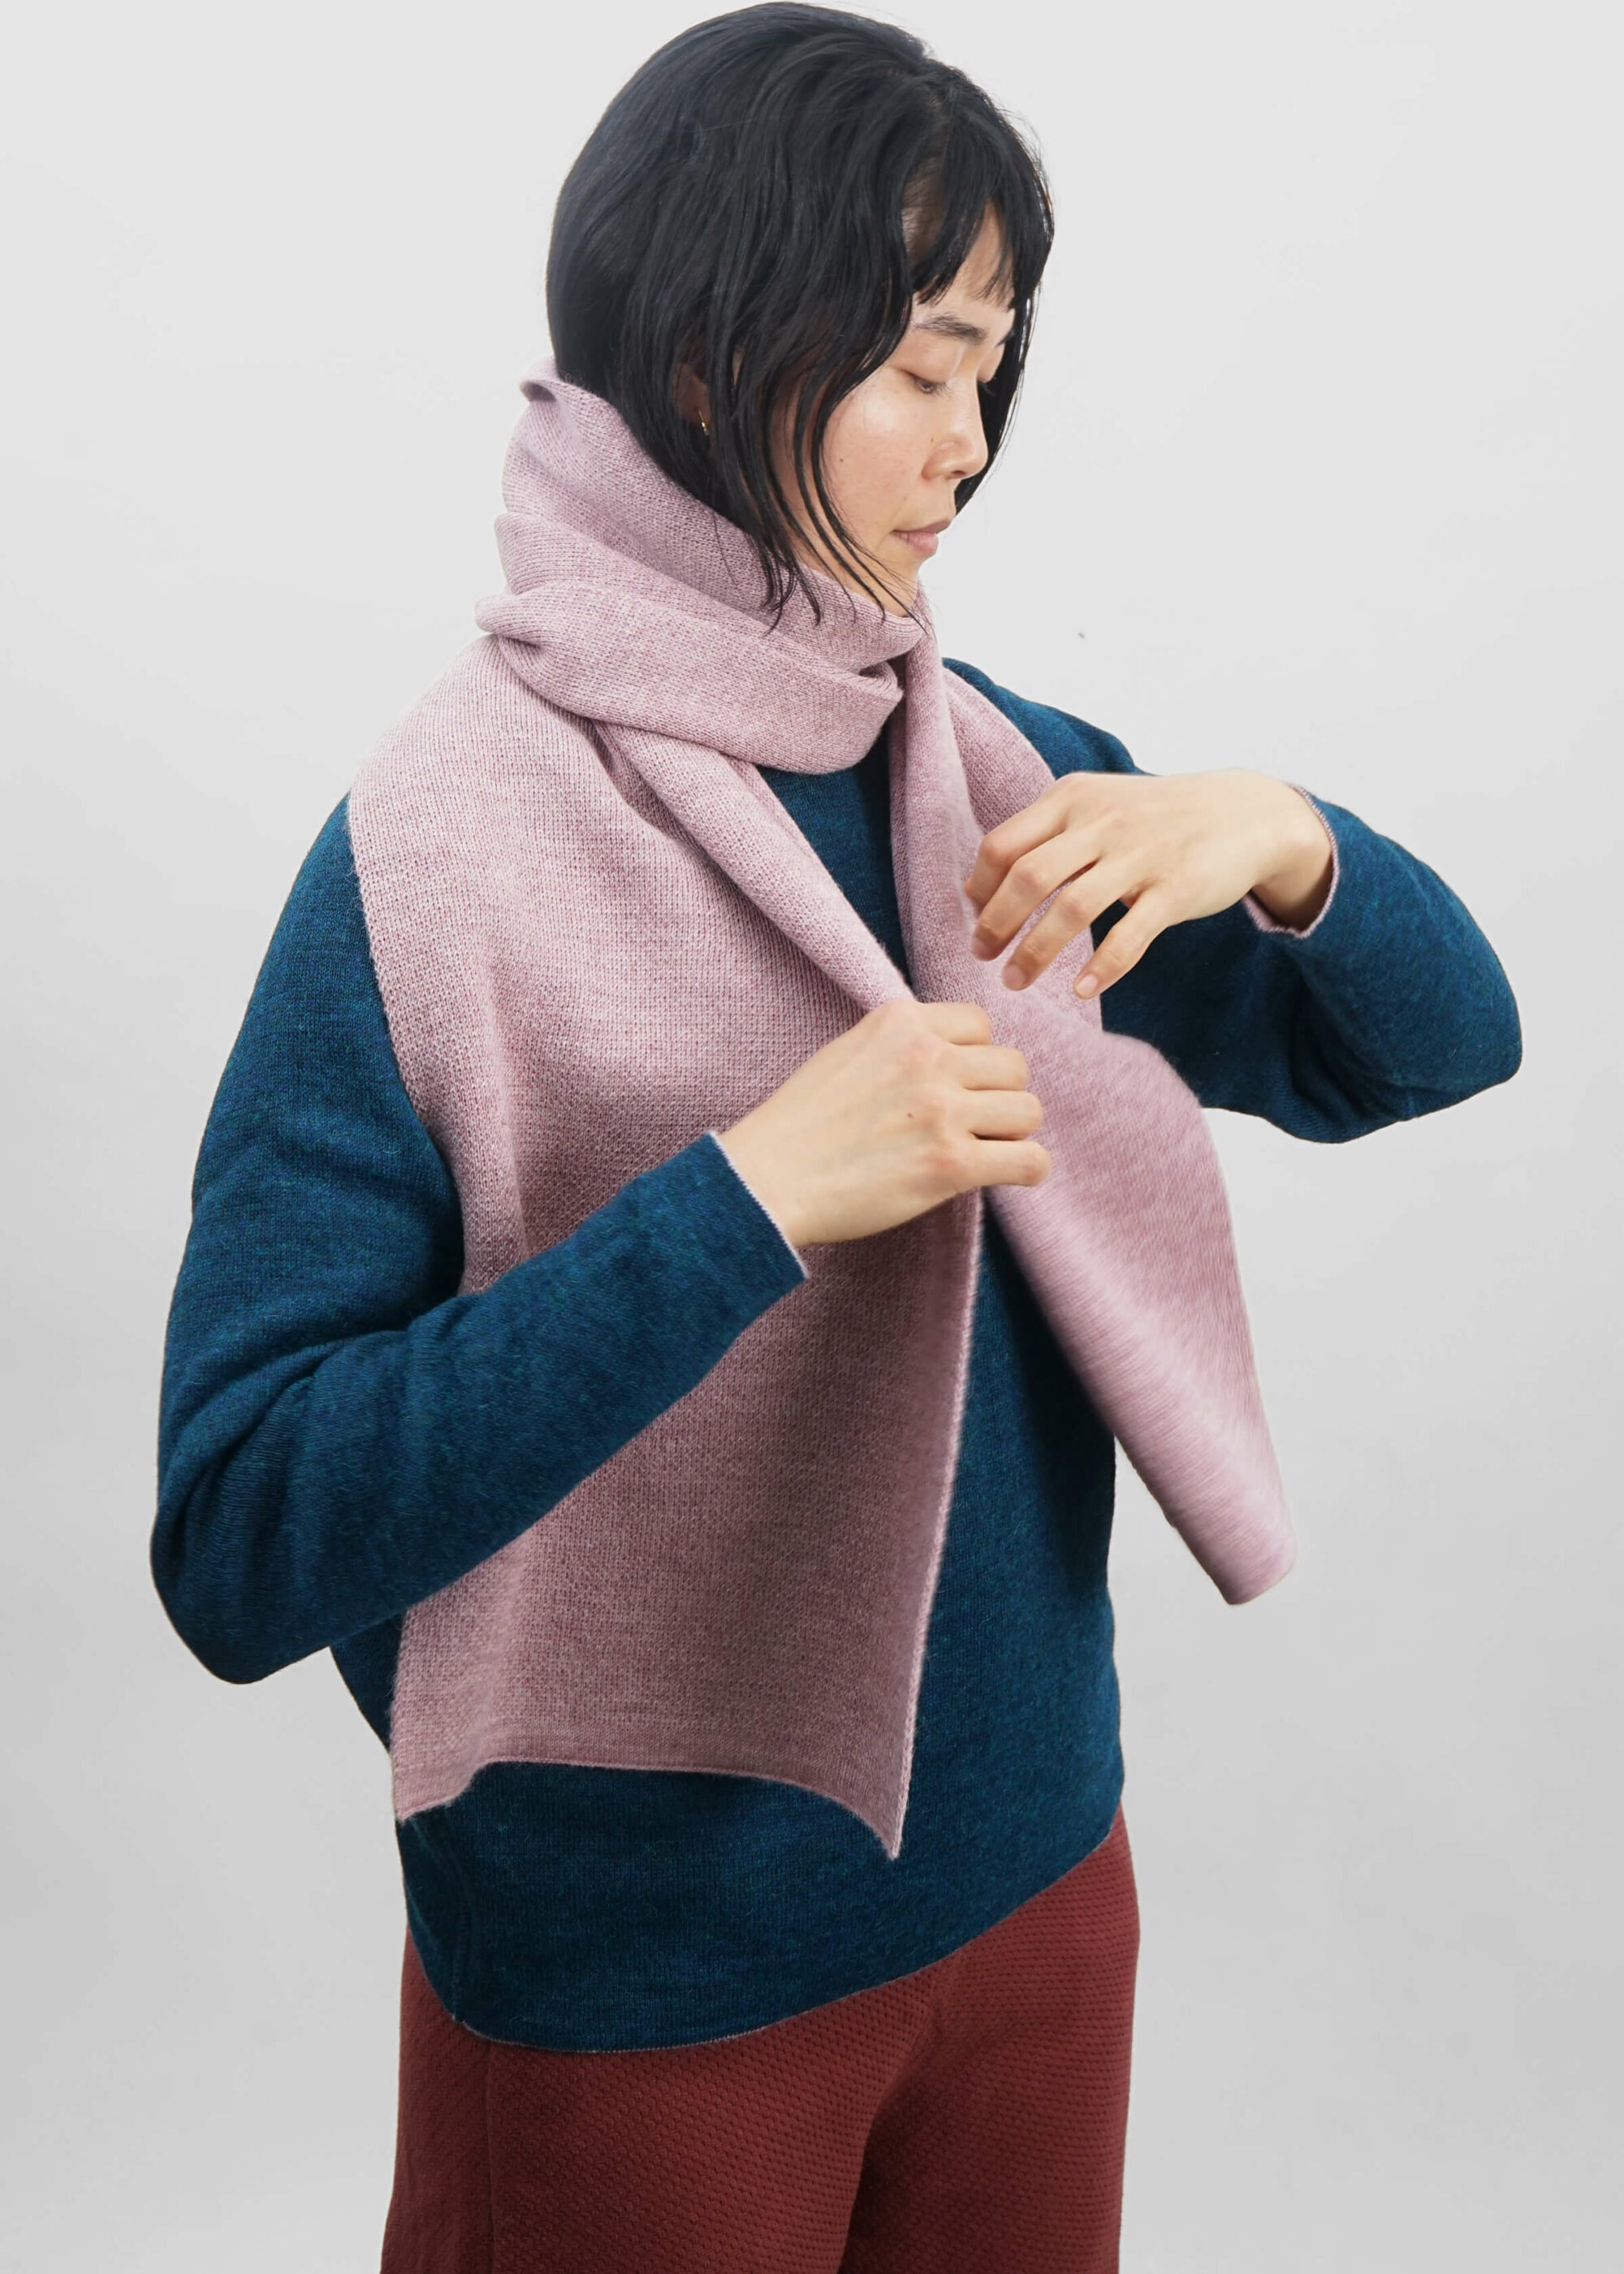 Product image for »Perriand« Pale Pink Scarf 100% Alpaca